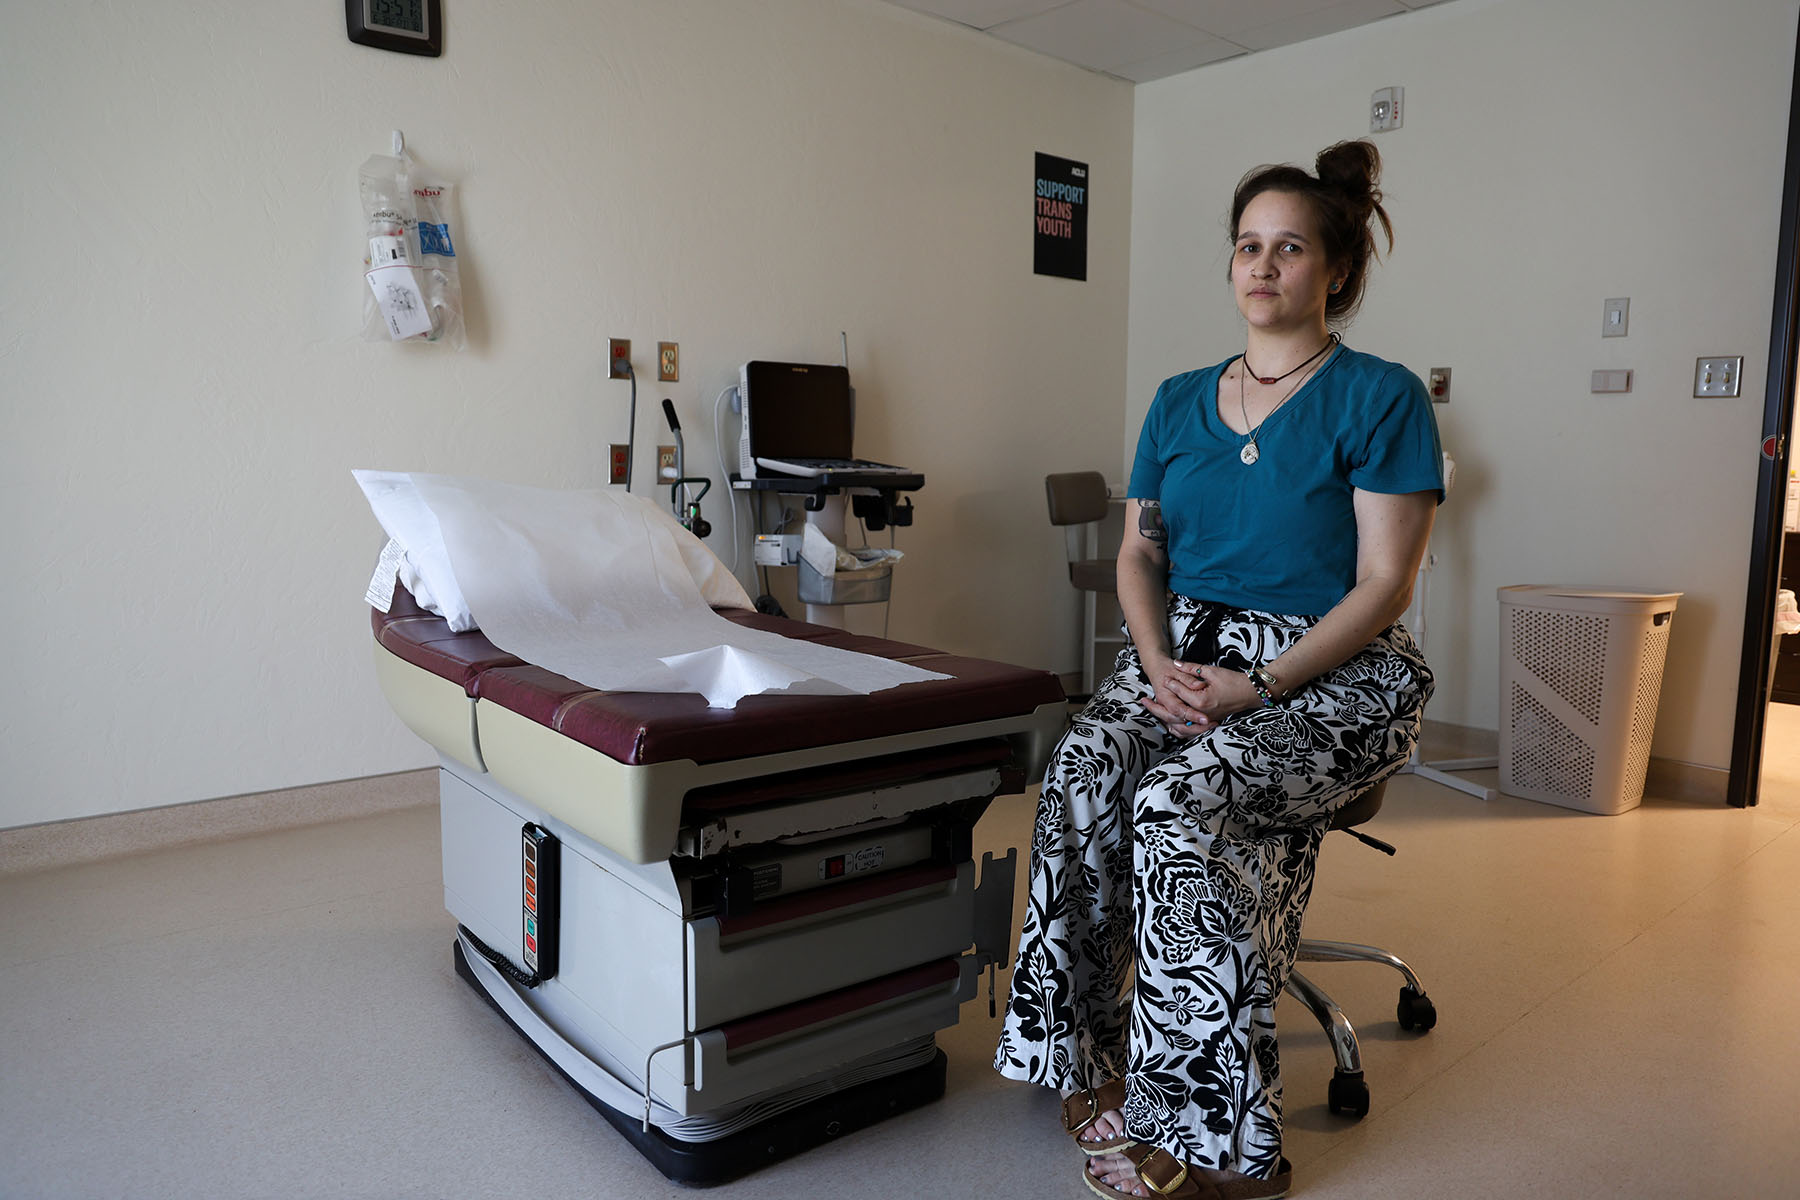 Kailey Voellinger, former clinic director at Trust Women in Oklahoma City, sits in a treatment room.